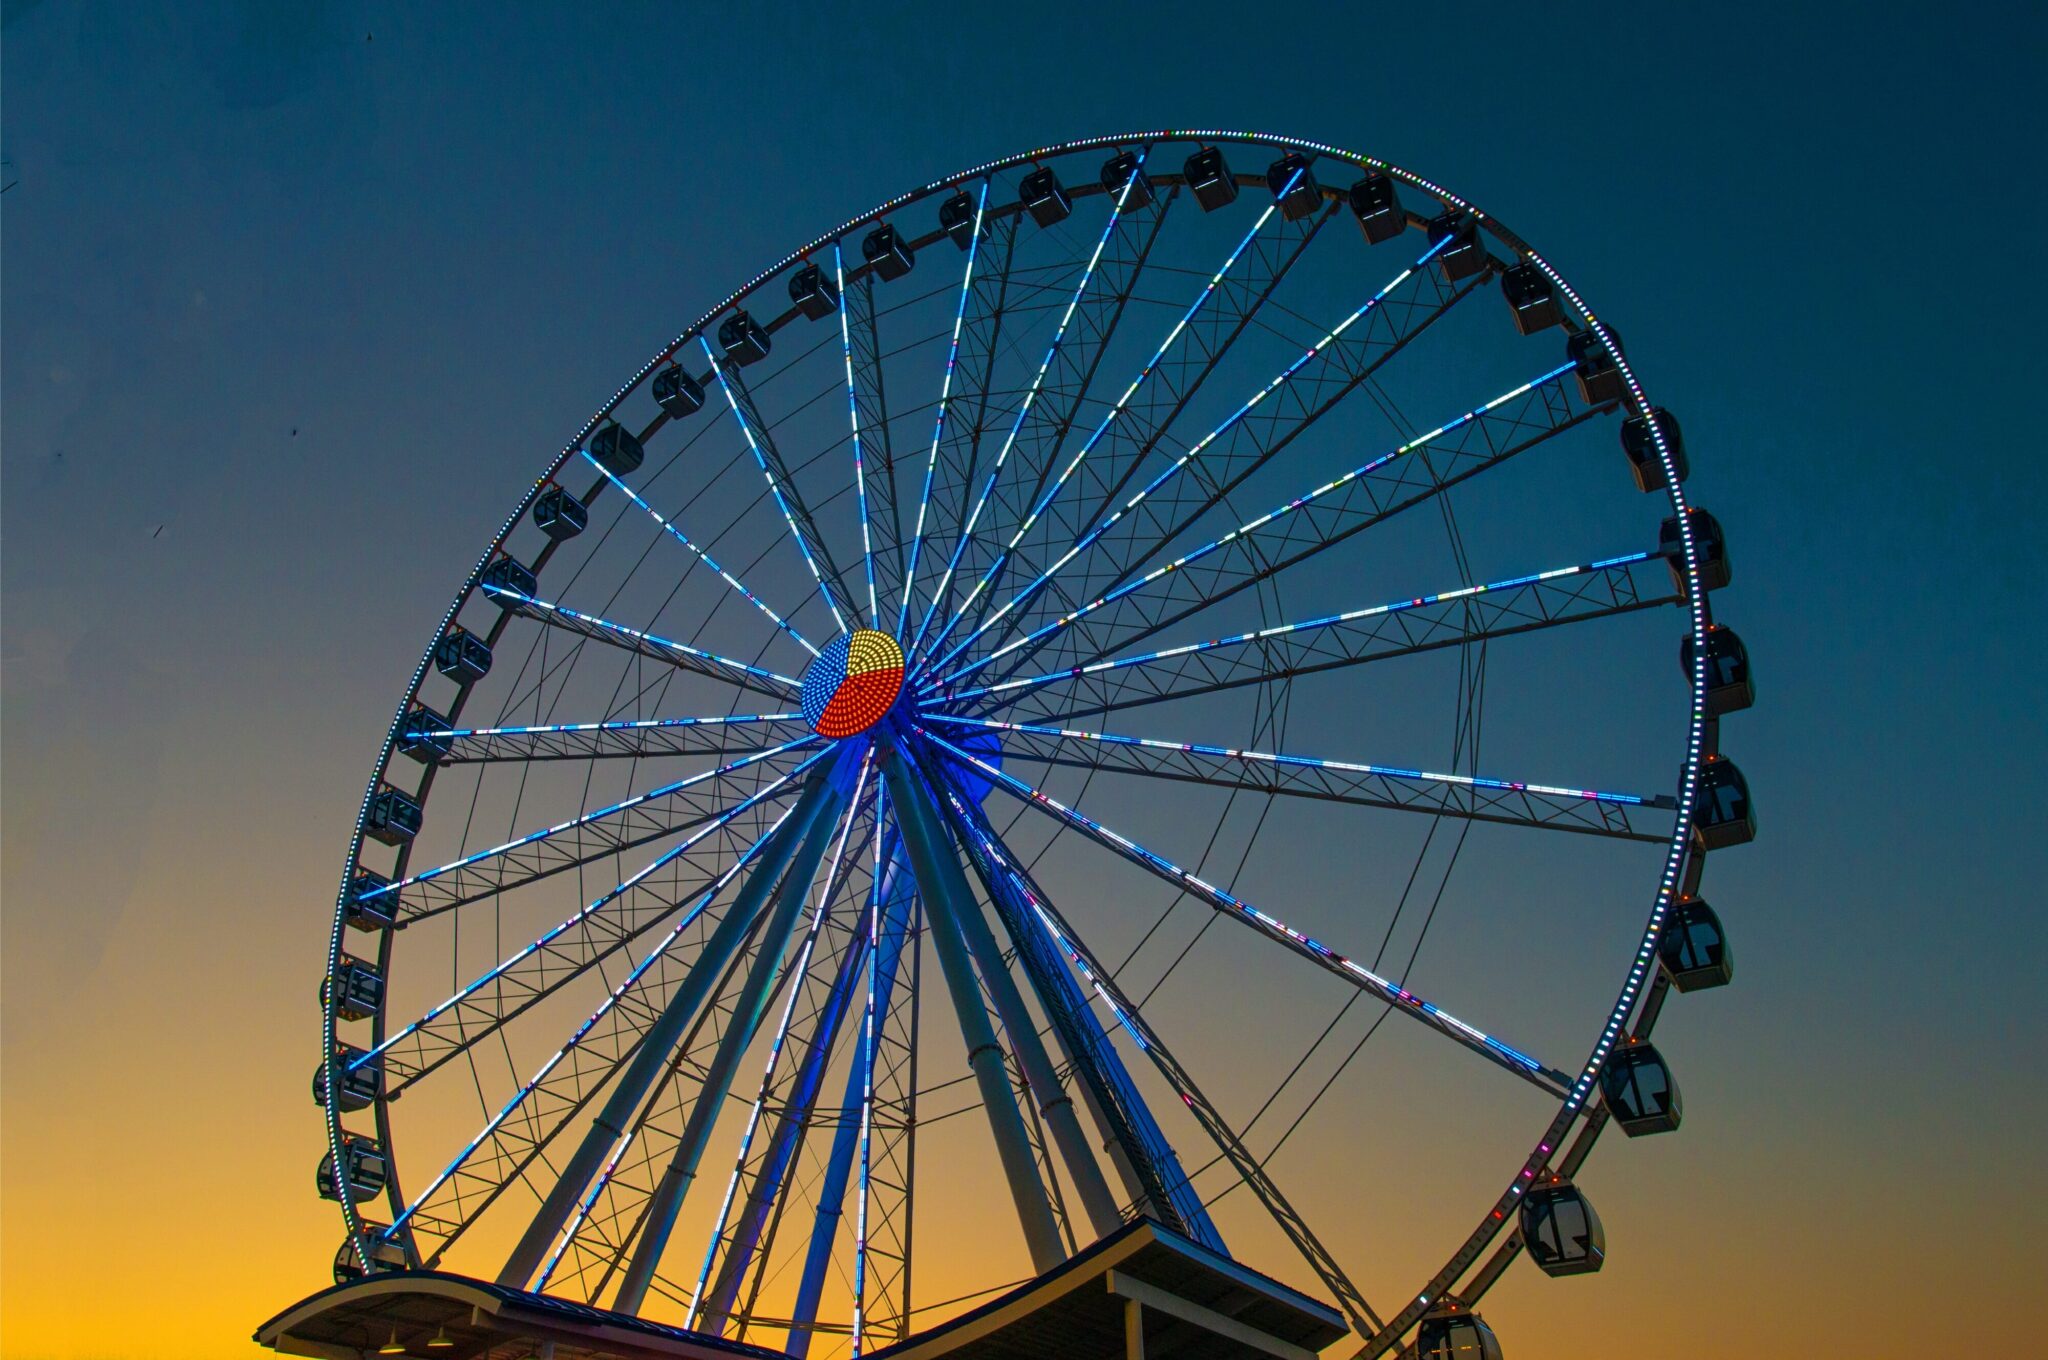 A vibrant ferris wheel illuminated against a picturesque sunset backdrop